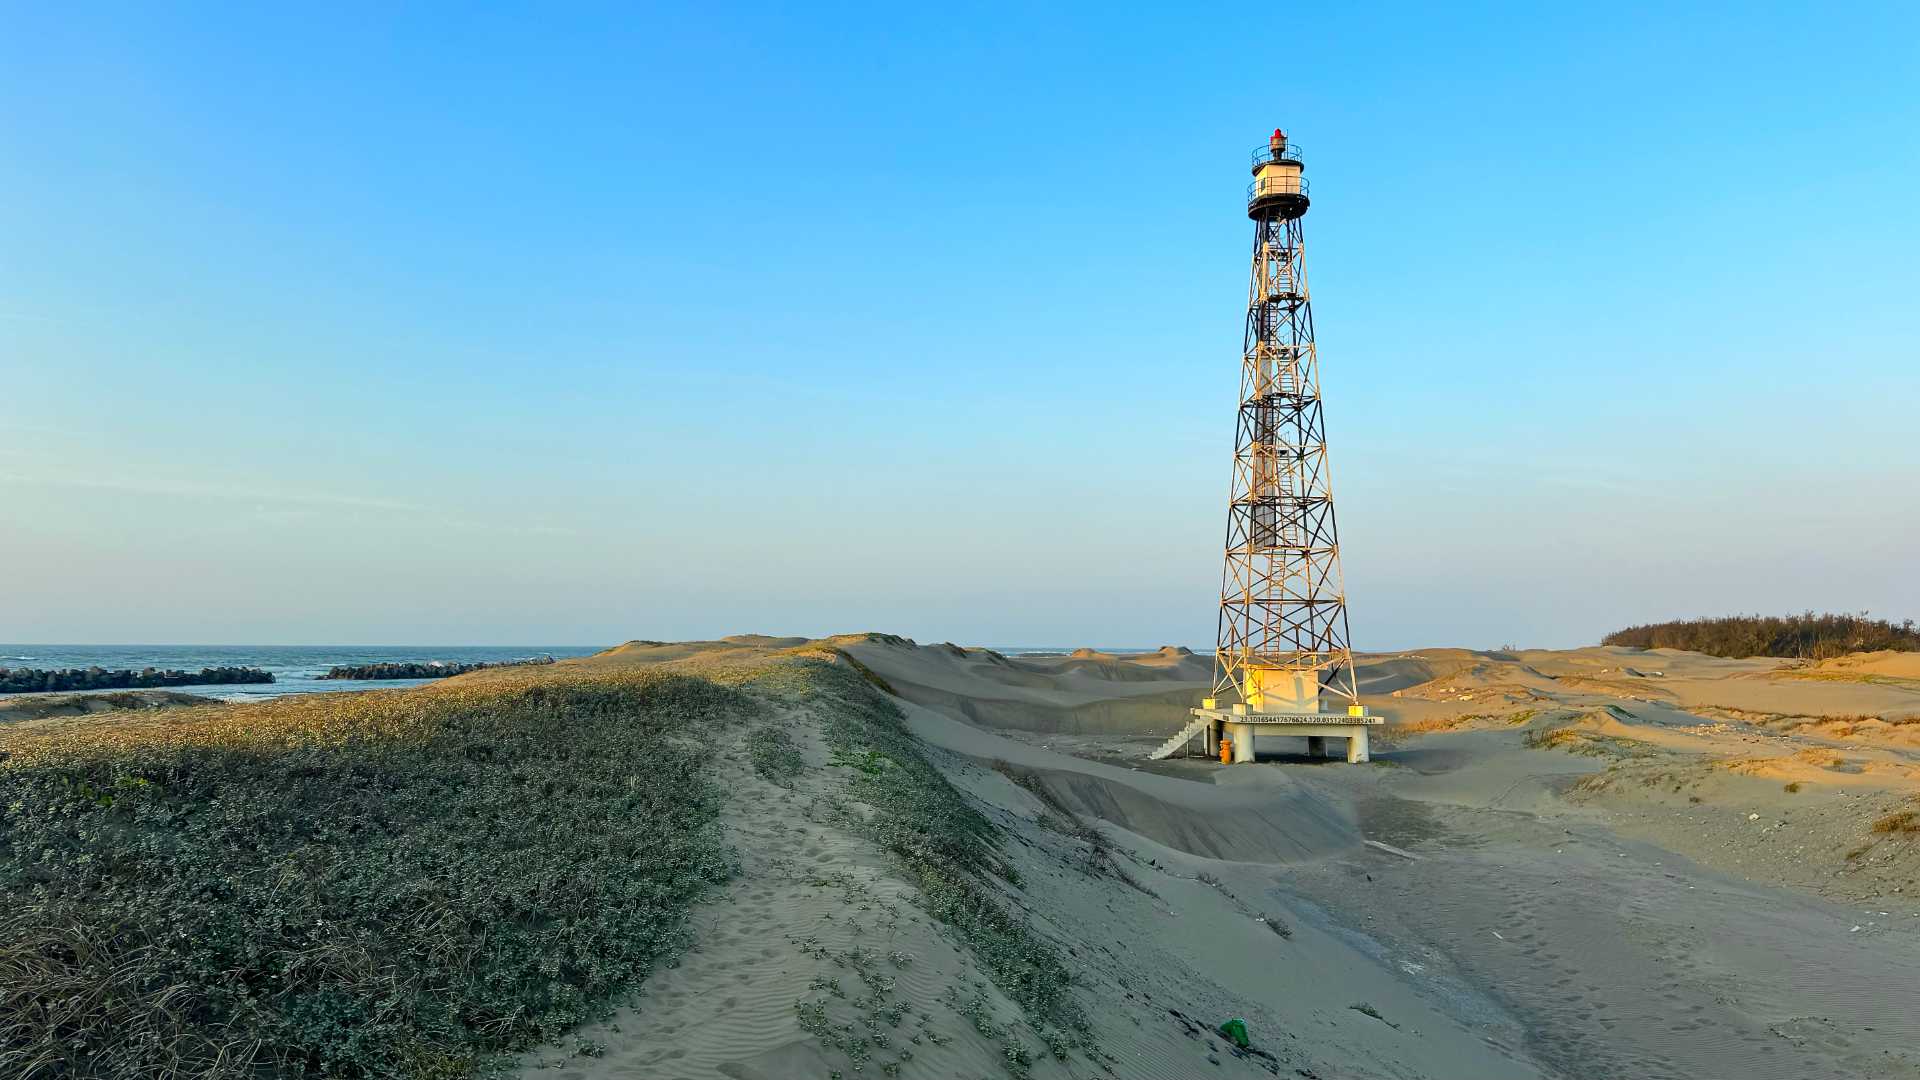 Guosheng Port Lighthouse, a skeletal metal structure rising from sand dunes, with the sea visible to the left.